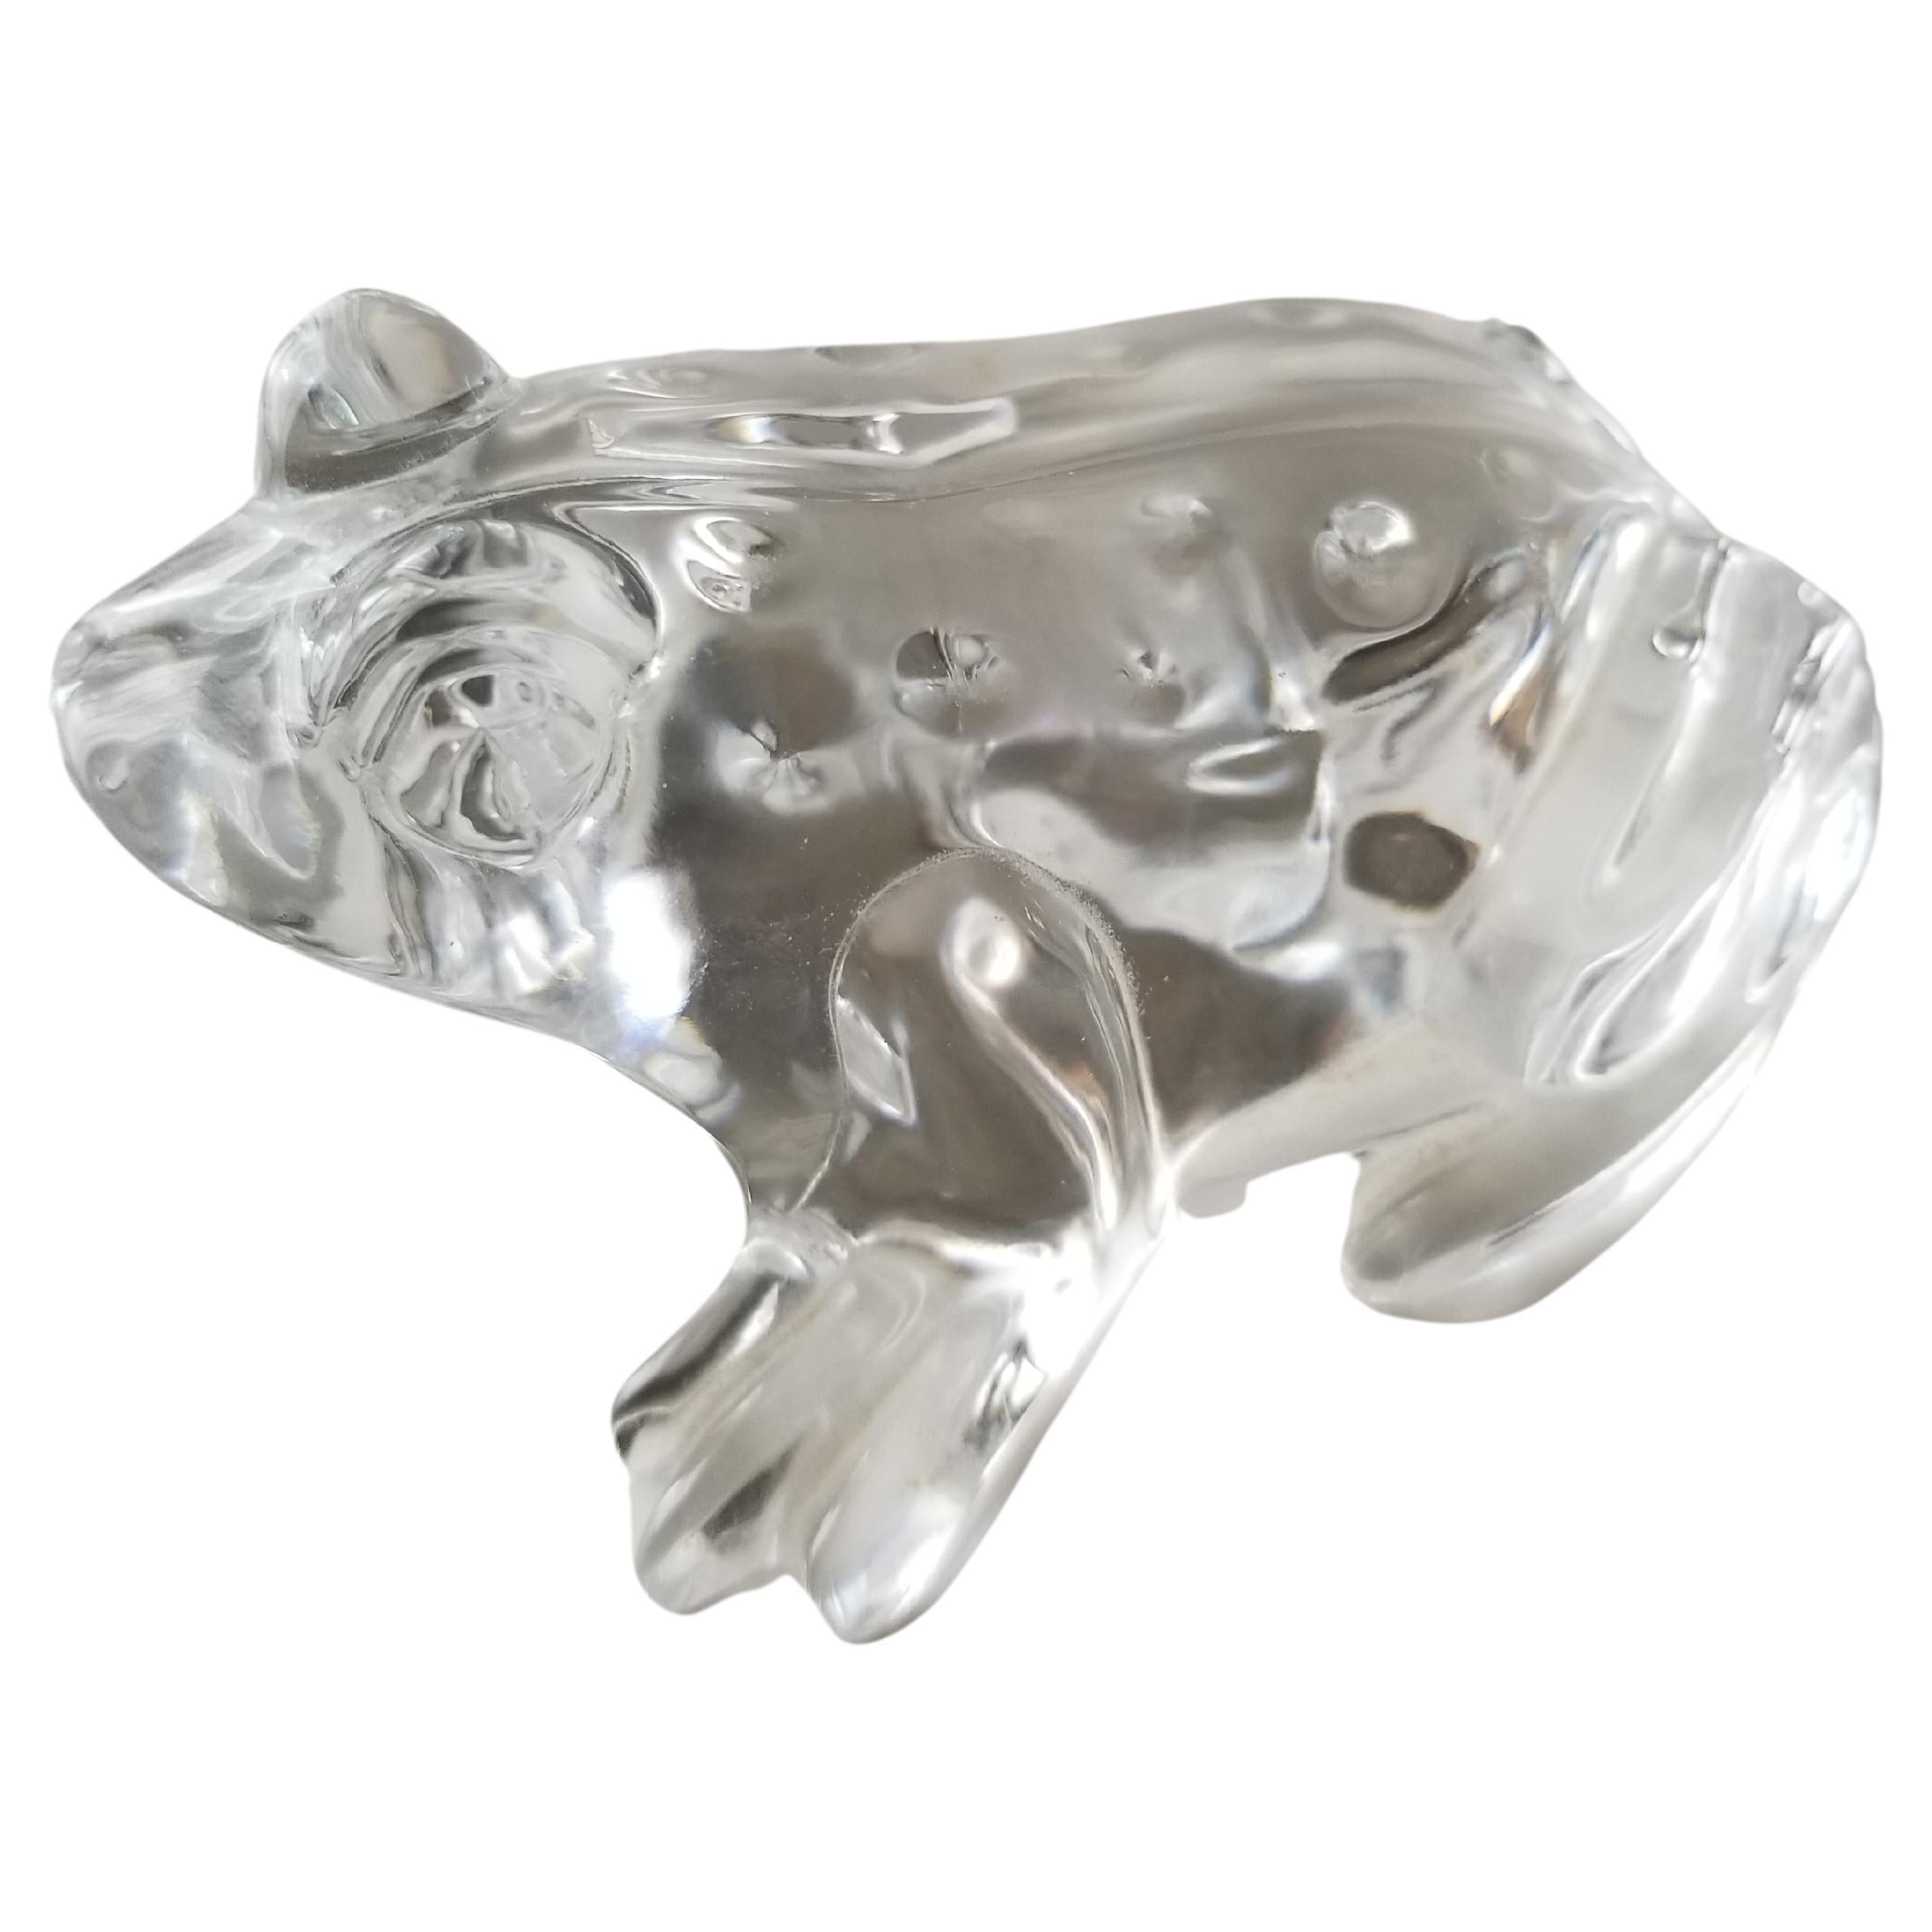 Frog paperweight.
1980s Adorable waterford crystal glass frog paperweight sculpture.
signed by maker Waterford made in Ireland
approximately 1.75 H x 3 W x 3.5 D.
Preowned original good vintage condition,
See images provided.